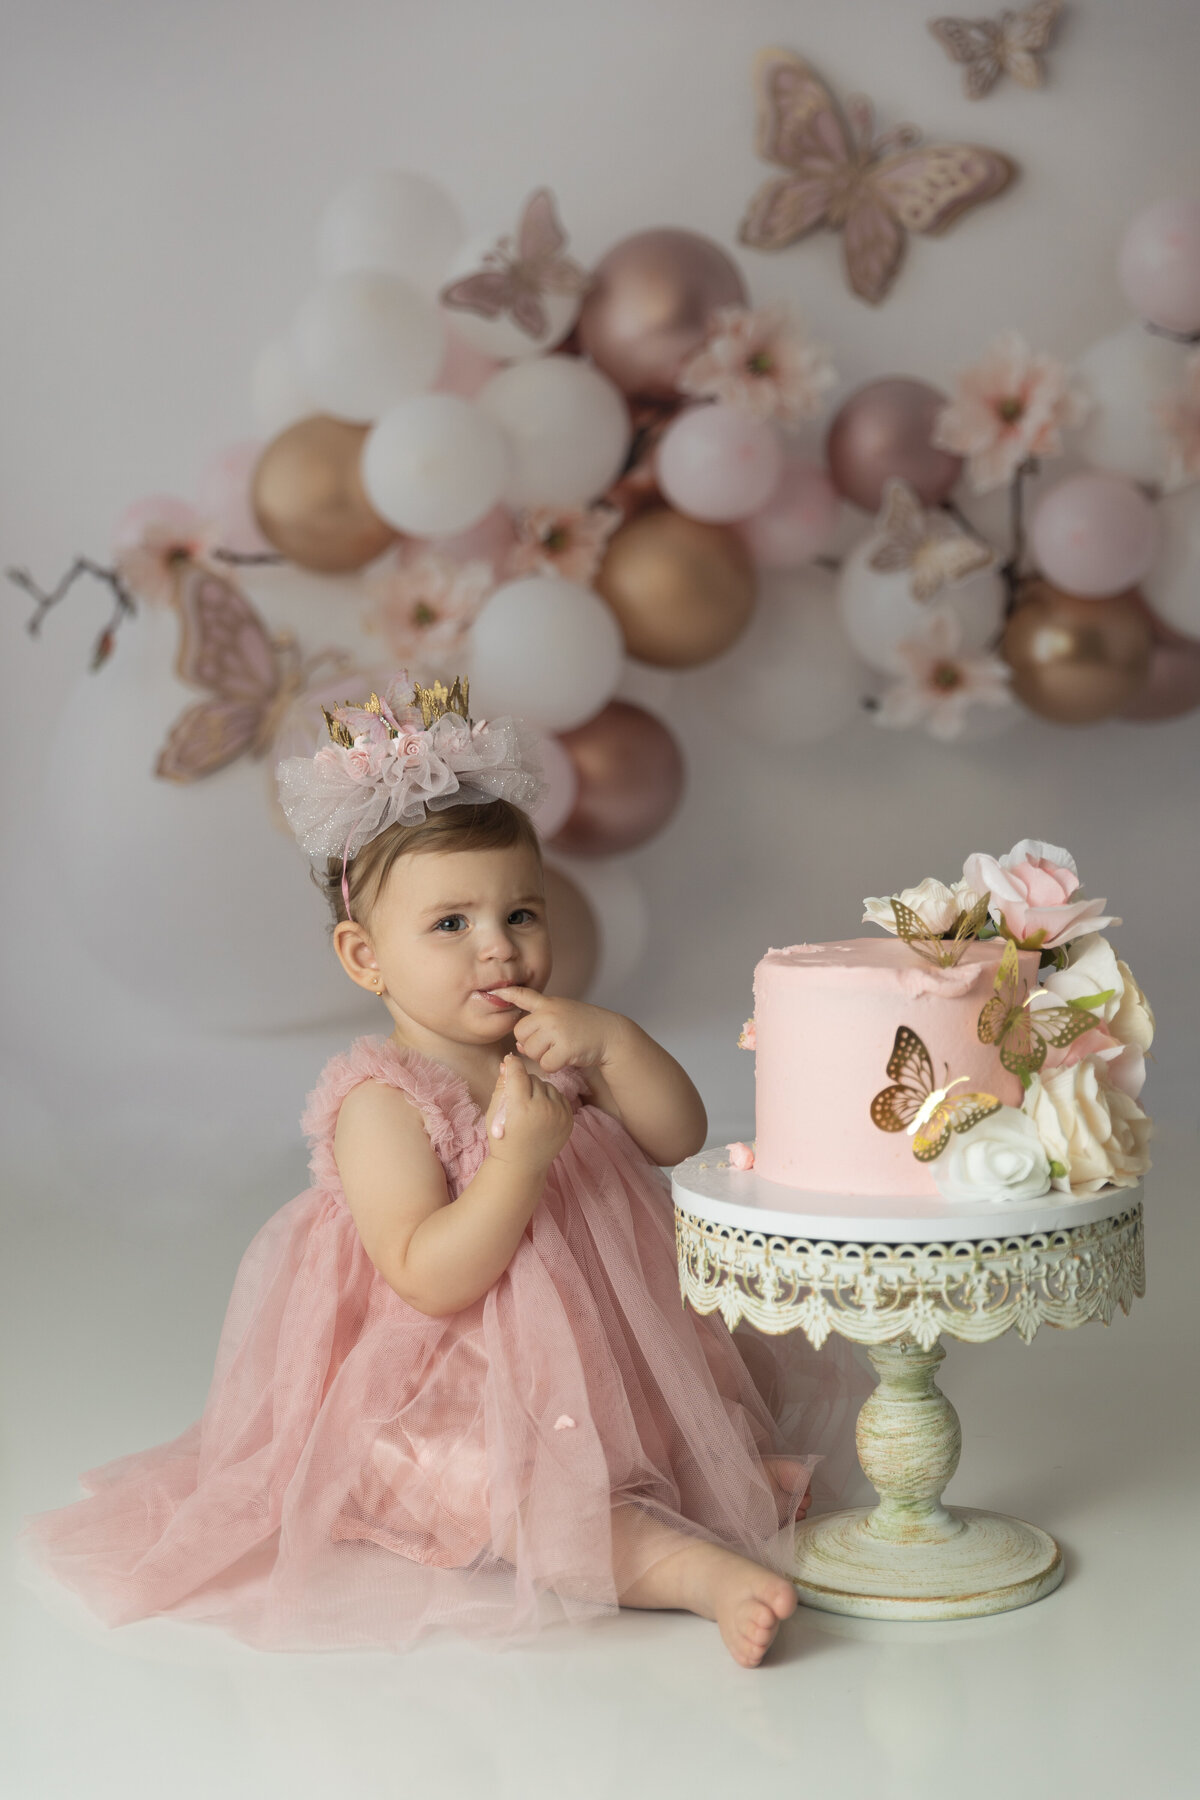 A toddler girl in a pink dress tastes the icing on her pink cake in a photo studio